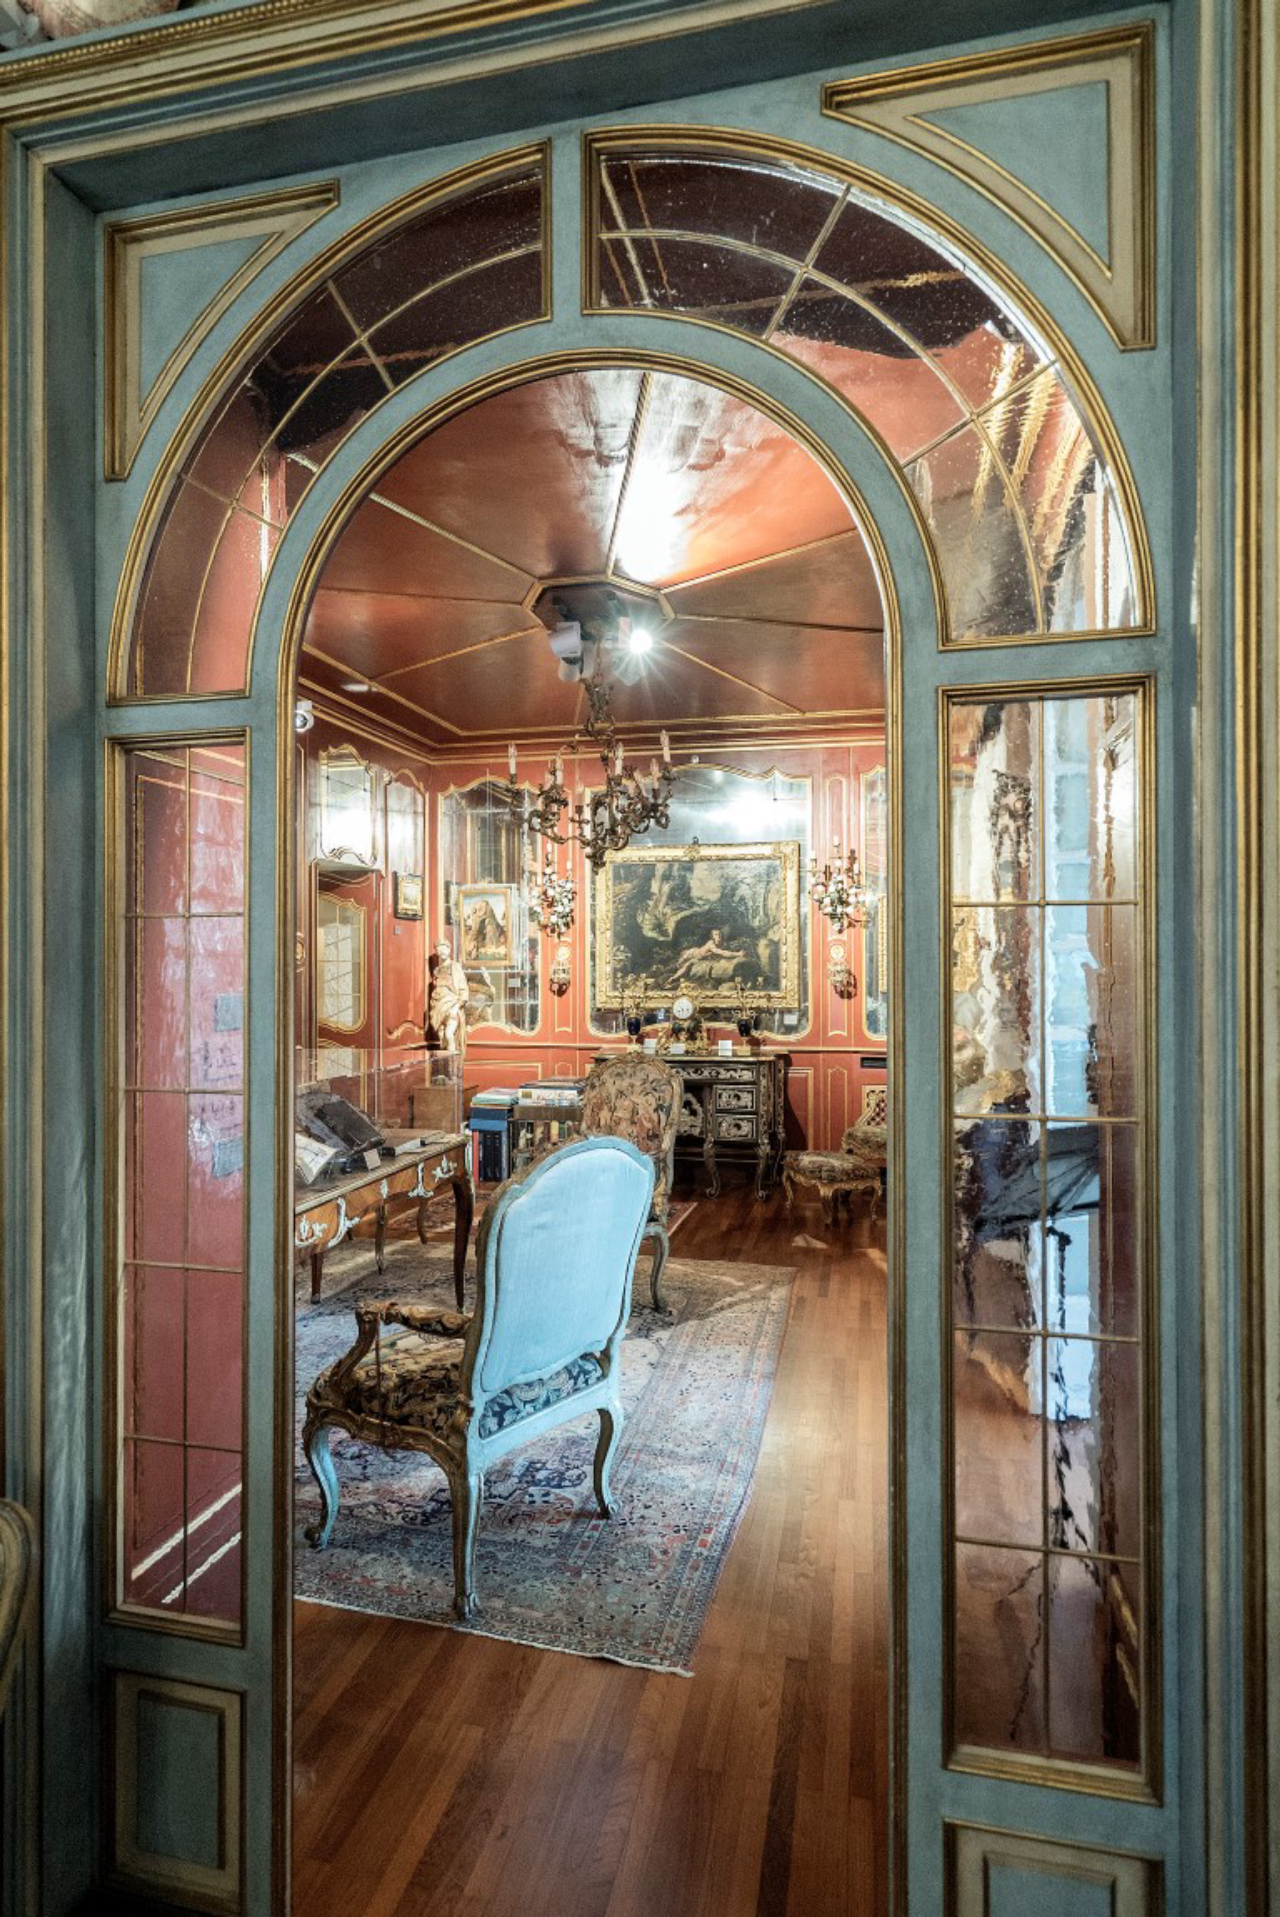 The study at Francesco Federico Cerruti's villa in Rivoli, Italy, May 1, 2019. Few knew that Cerruti, who died in 2015, owned artwork that would later be valued at $600 million and that he had been discreetly buying works from auctions and dealers for decades. (Alessandro Grassani/The New York Times)